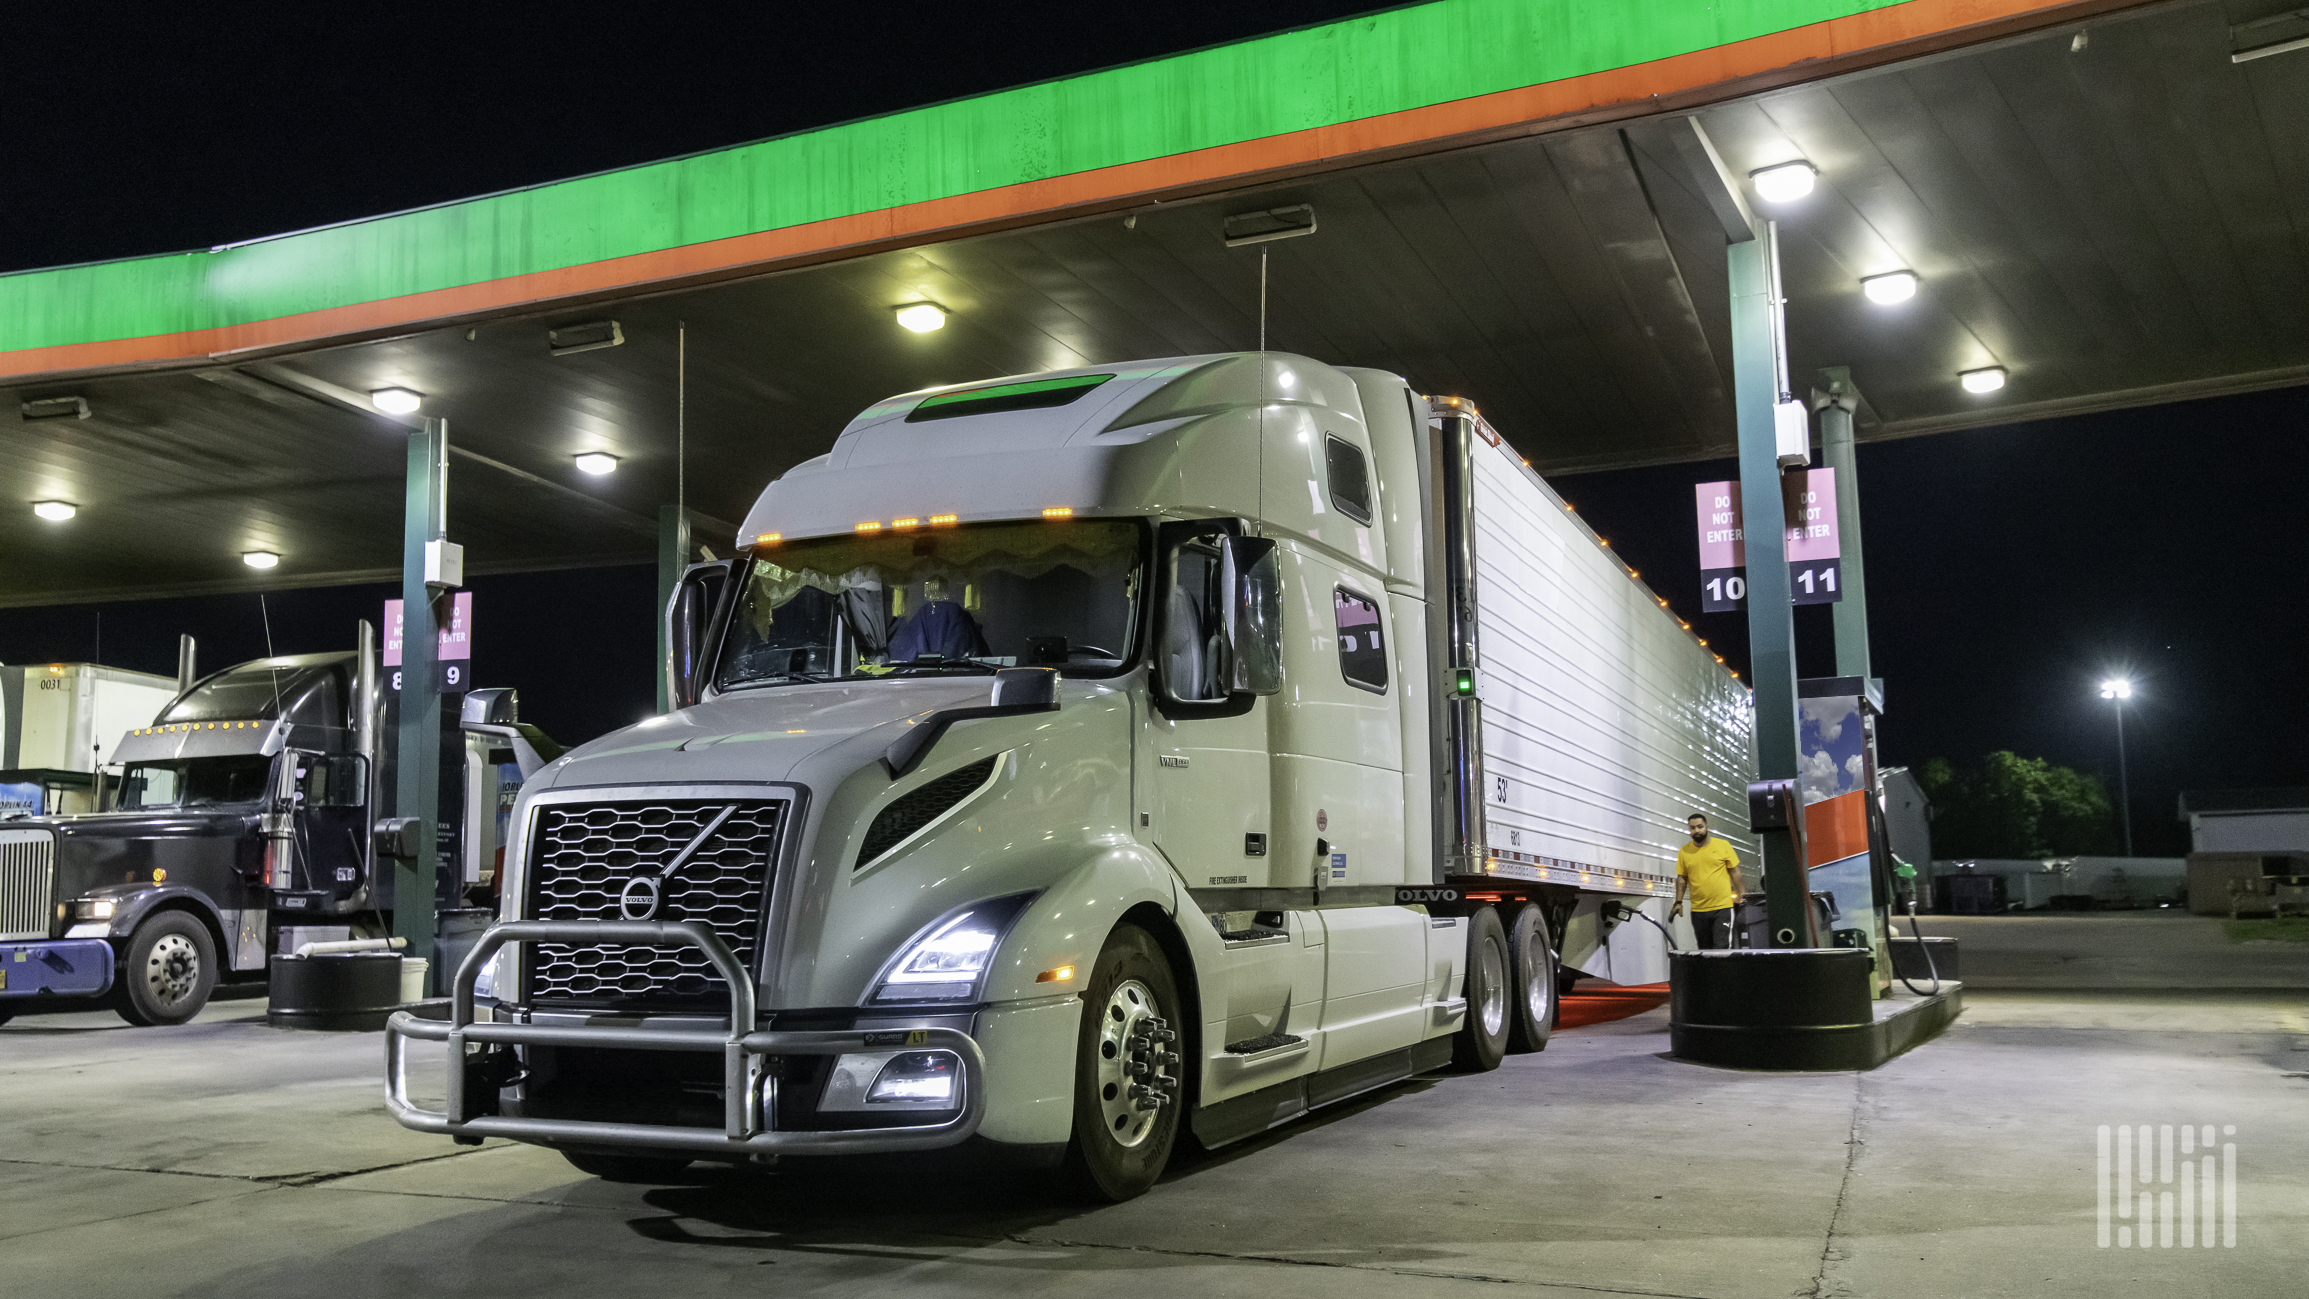 Amid rise in fuel theft, two companies collaborate to safeguard fleets